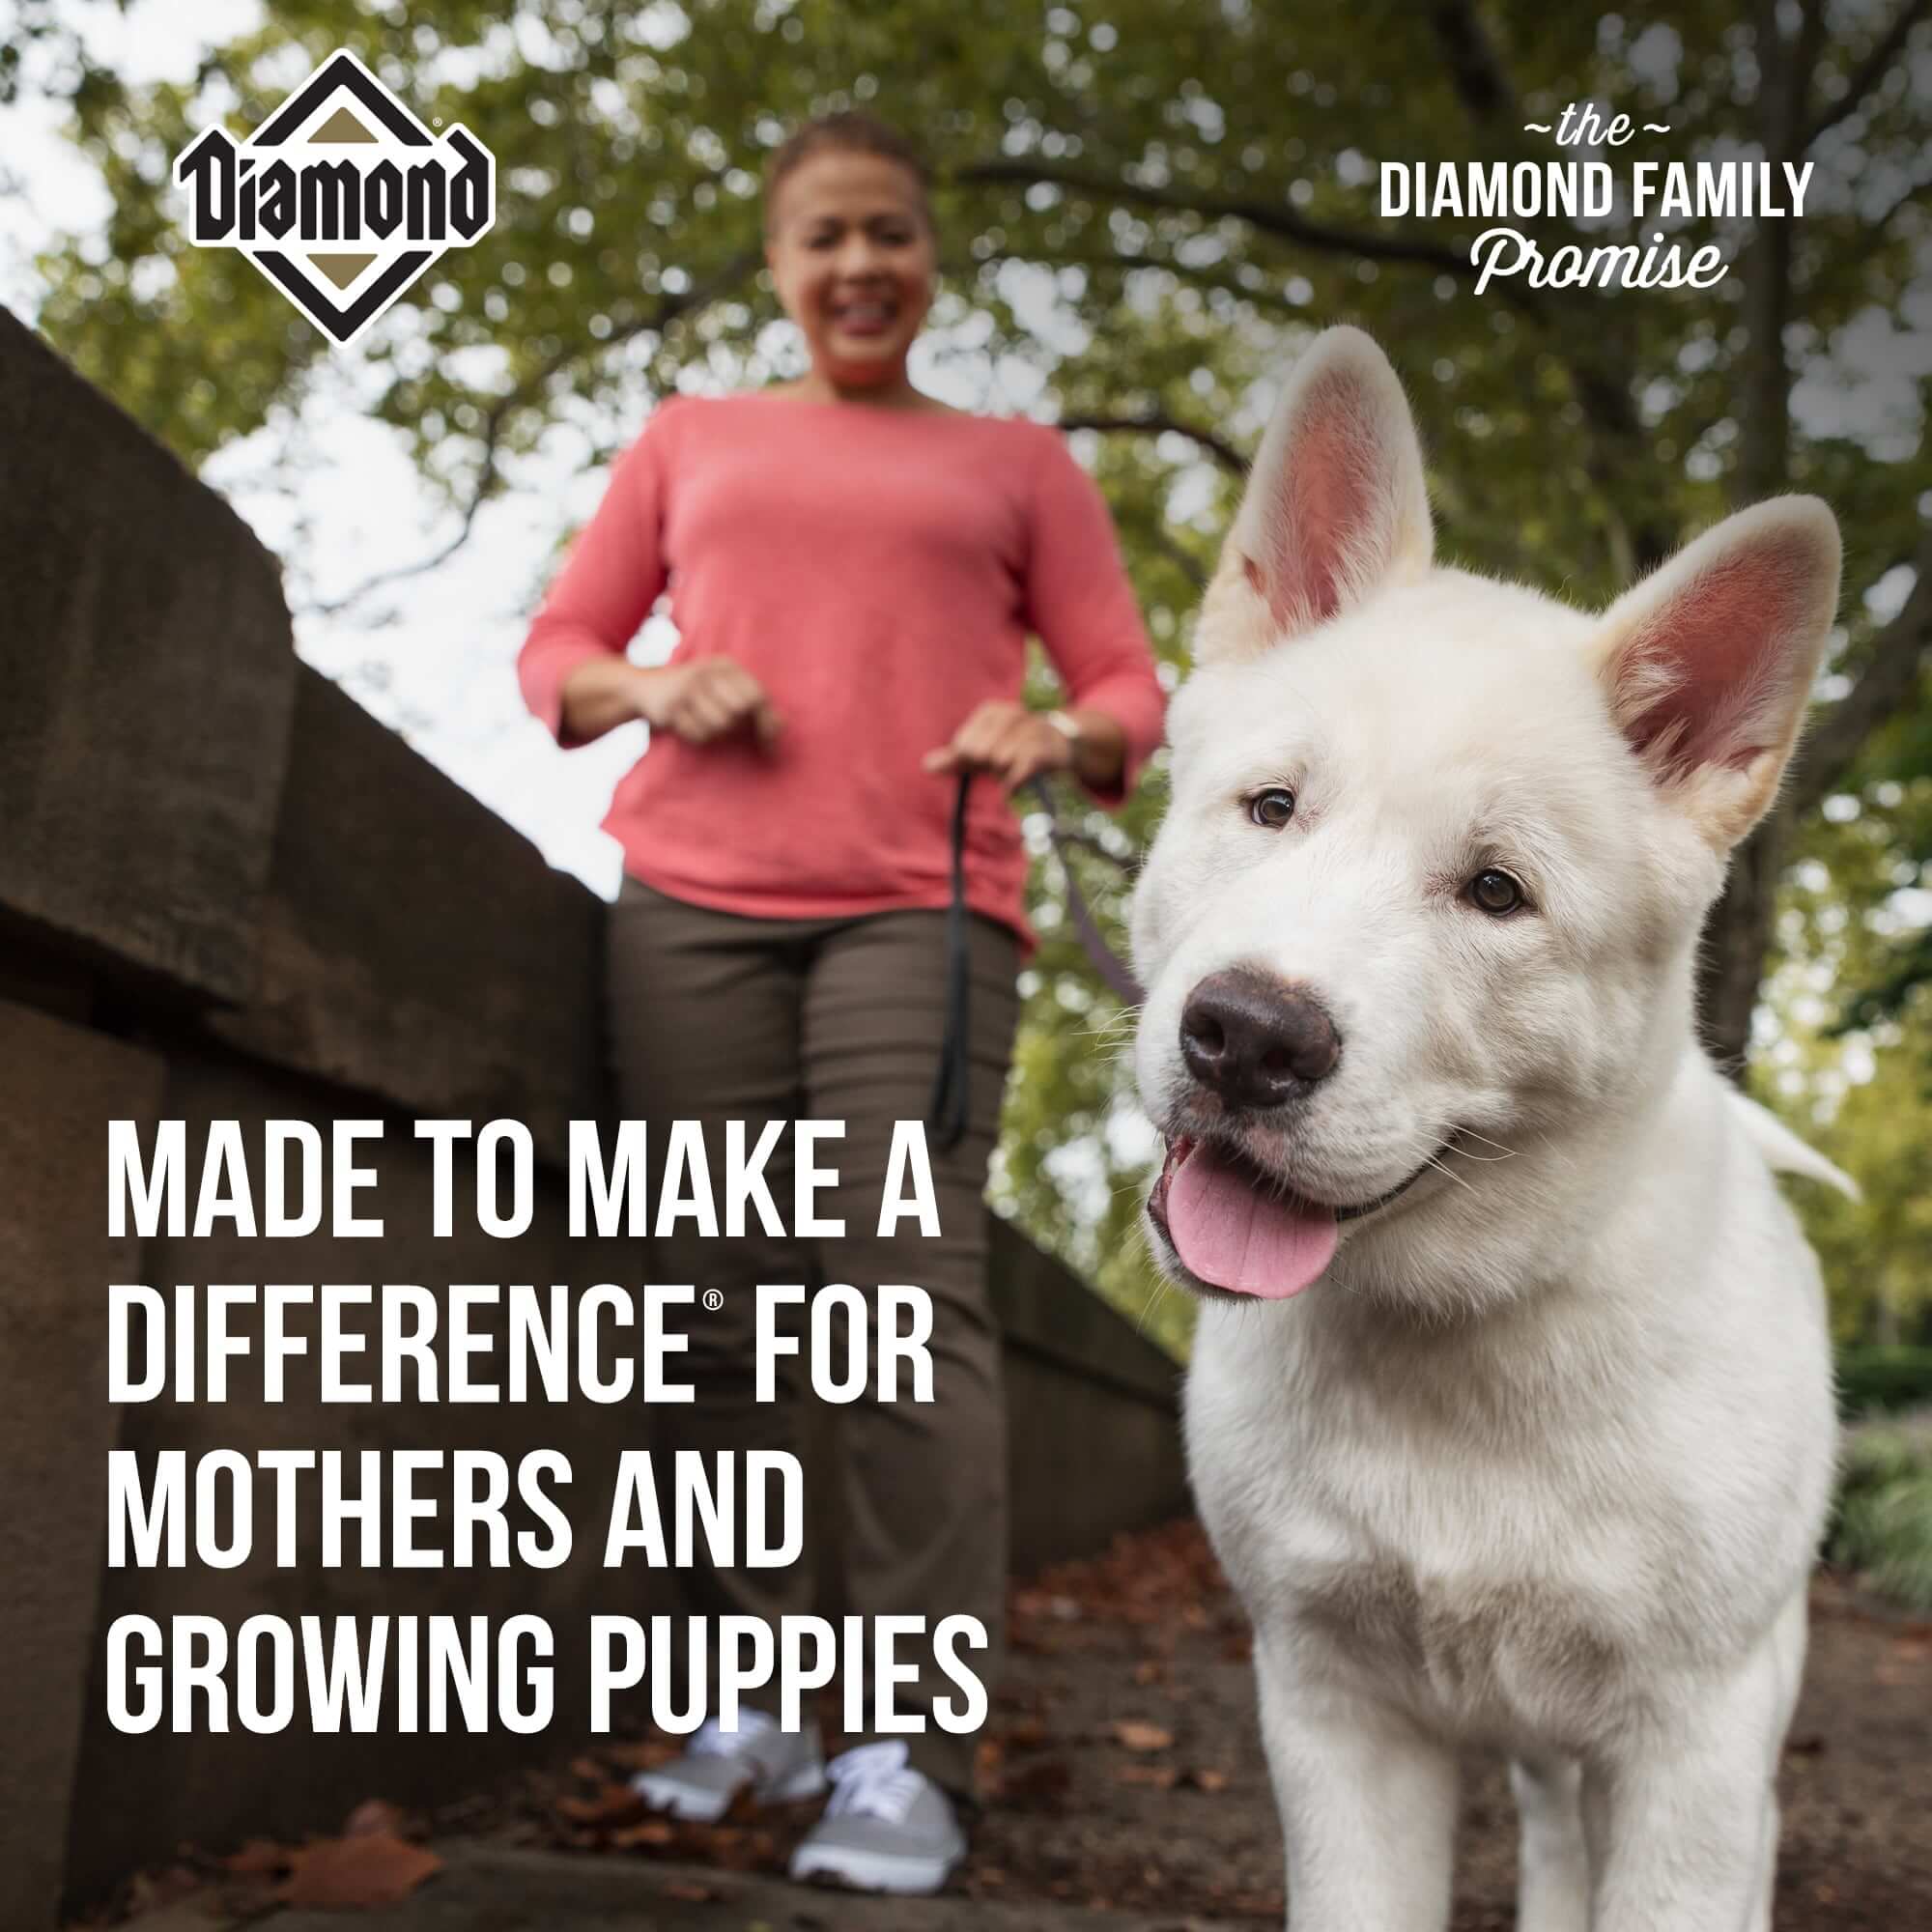 Diamond Made to make a difference for mothers and growing puppies